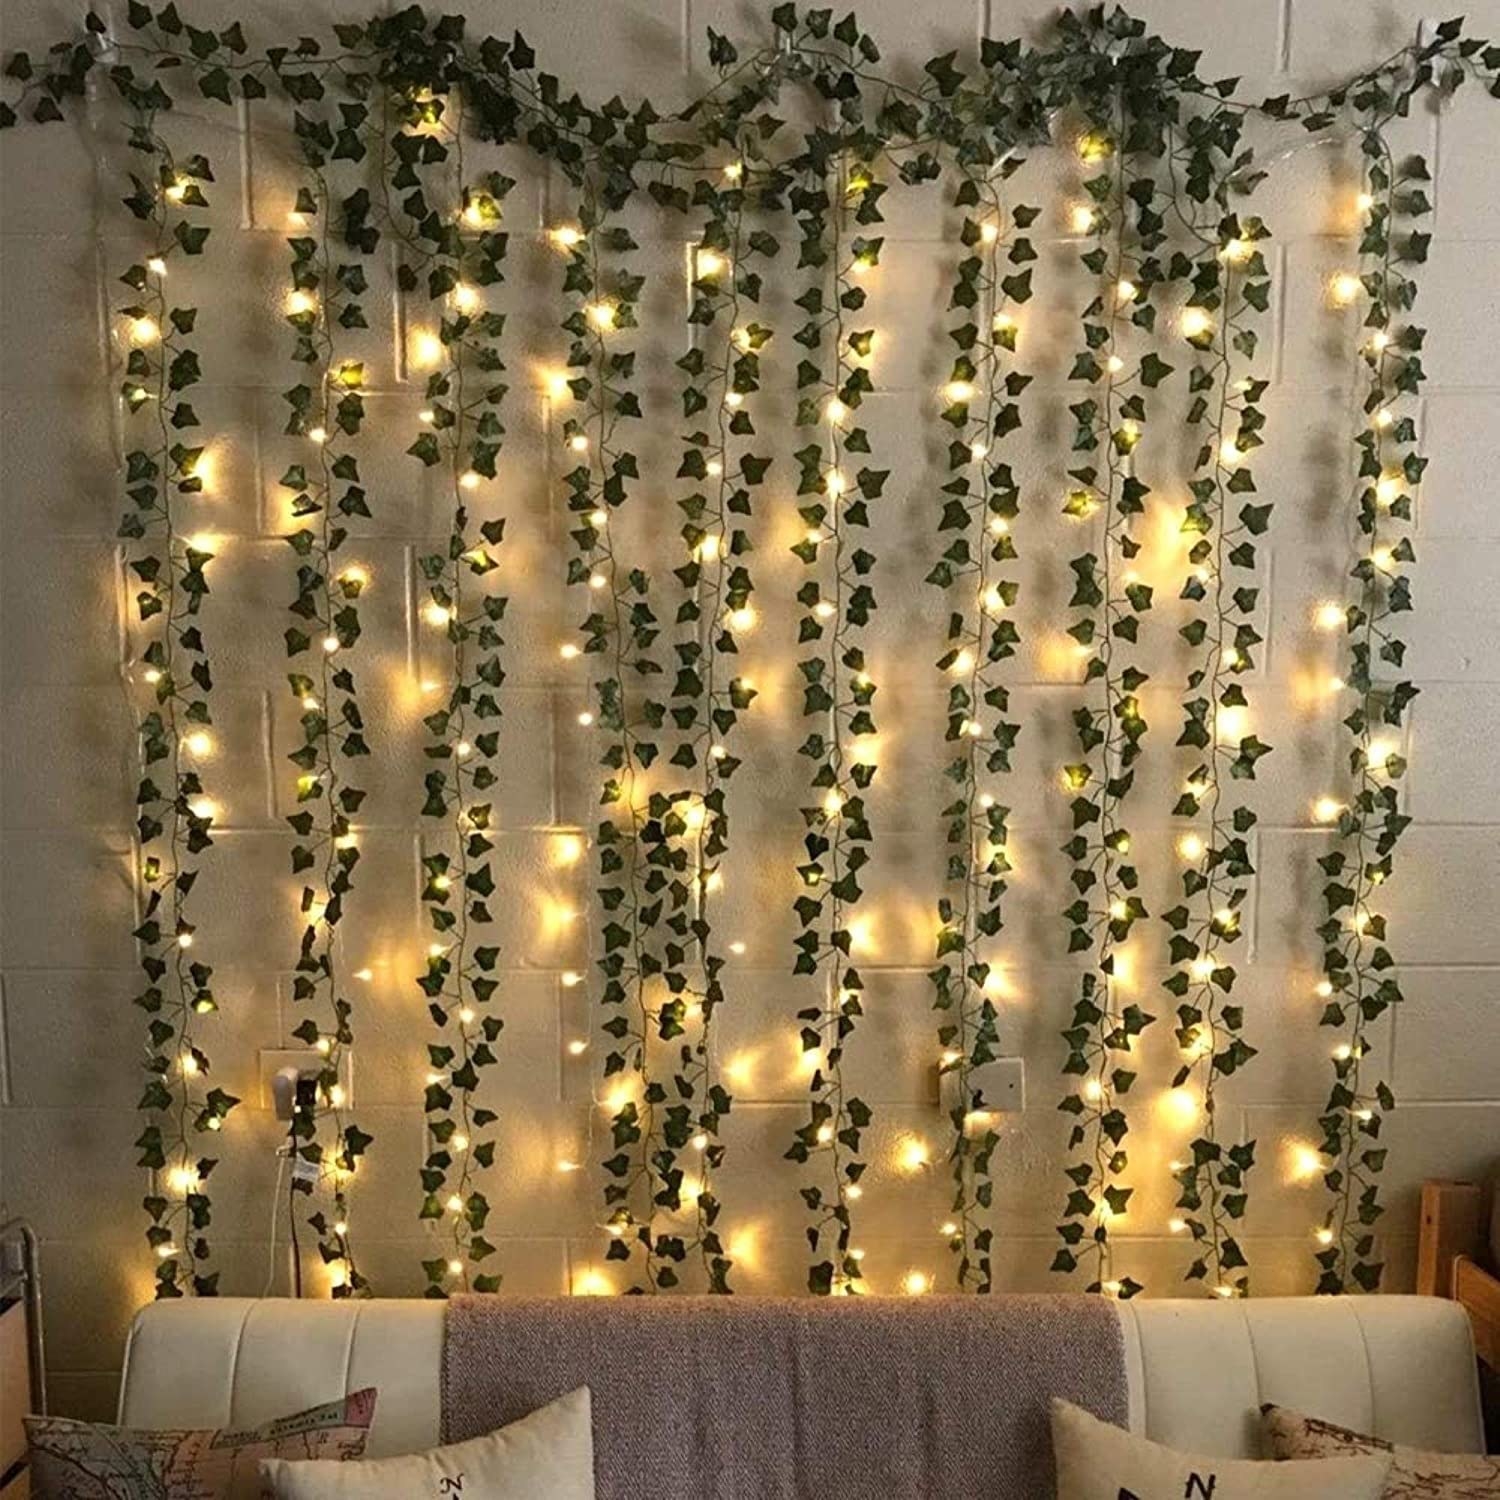 Garlands hanging from a wall, intertwined with lights.